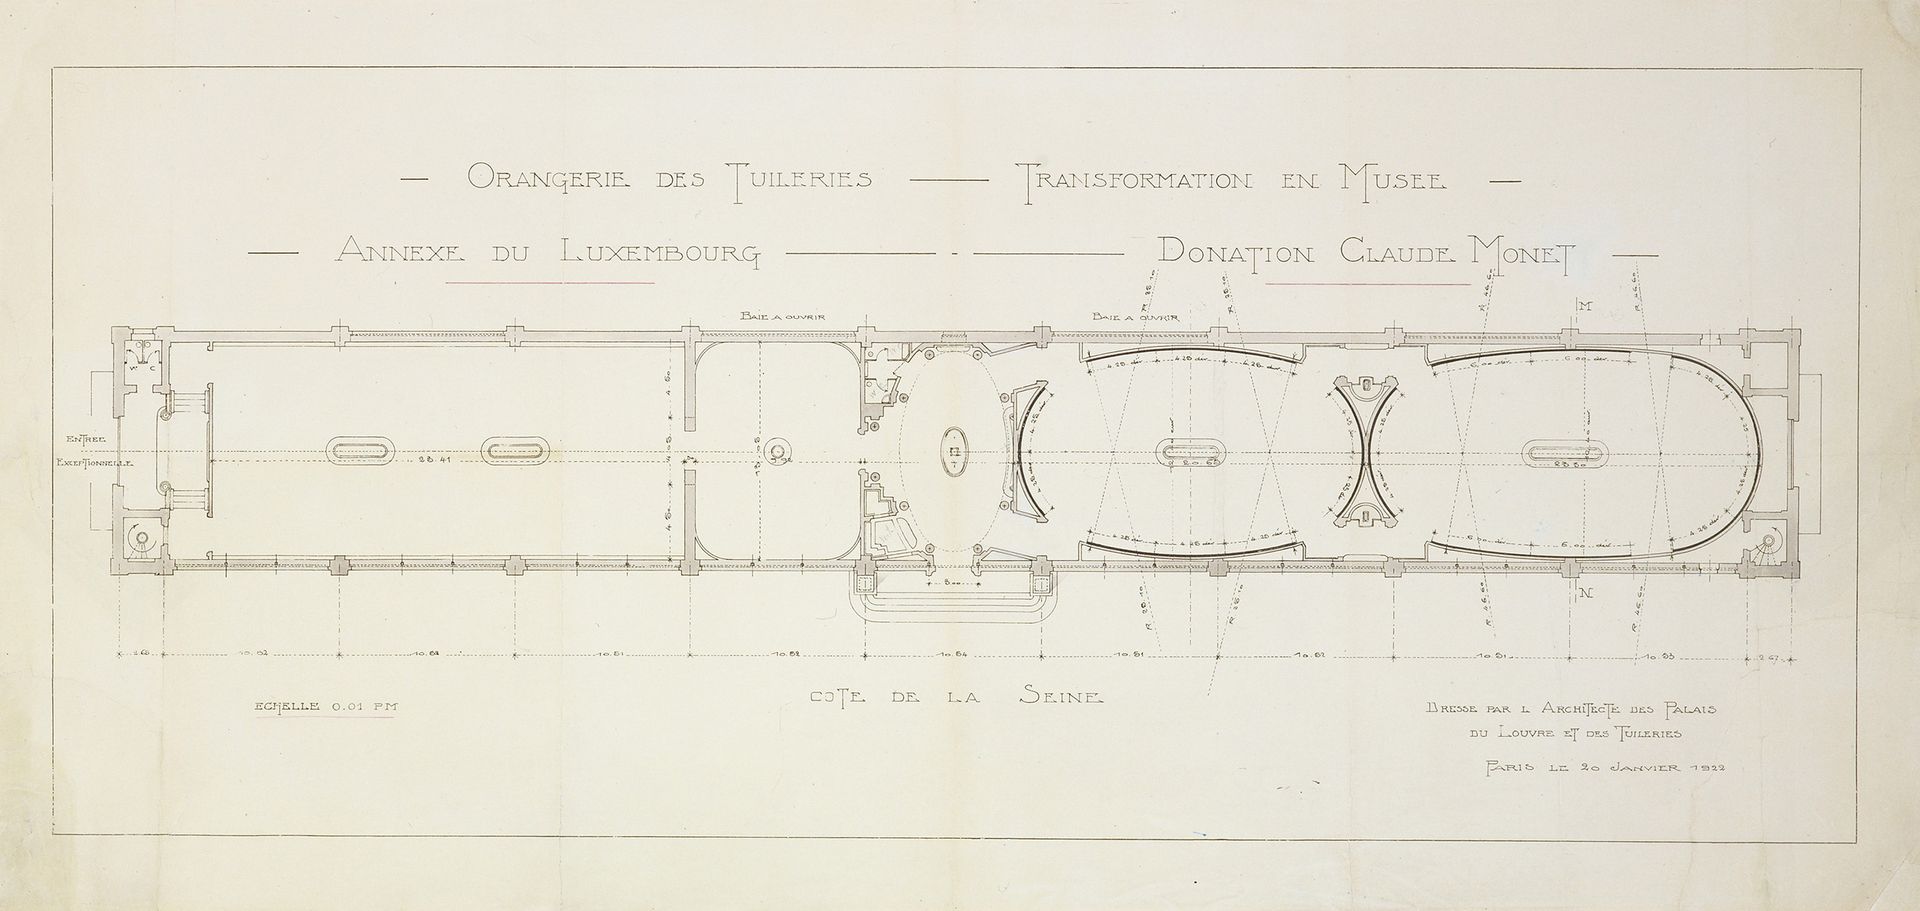 Camille Lefèvre (architect) Water Lilies Gallery Floor Plan for the Orangerie des Tuileries January 20, 1922 © Archives nationales (France), F/21/165, dossier 24. 